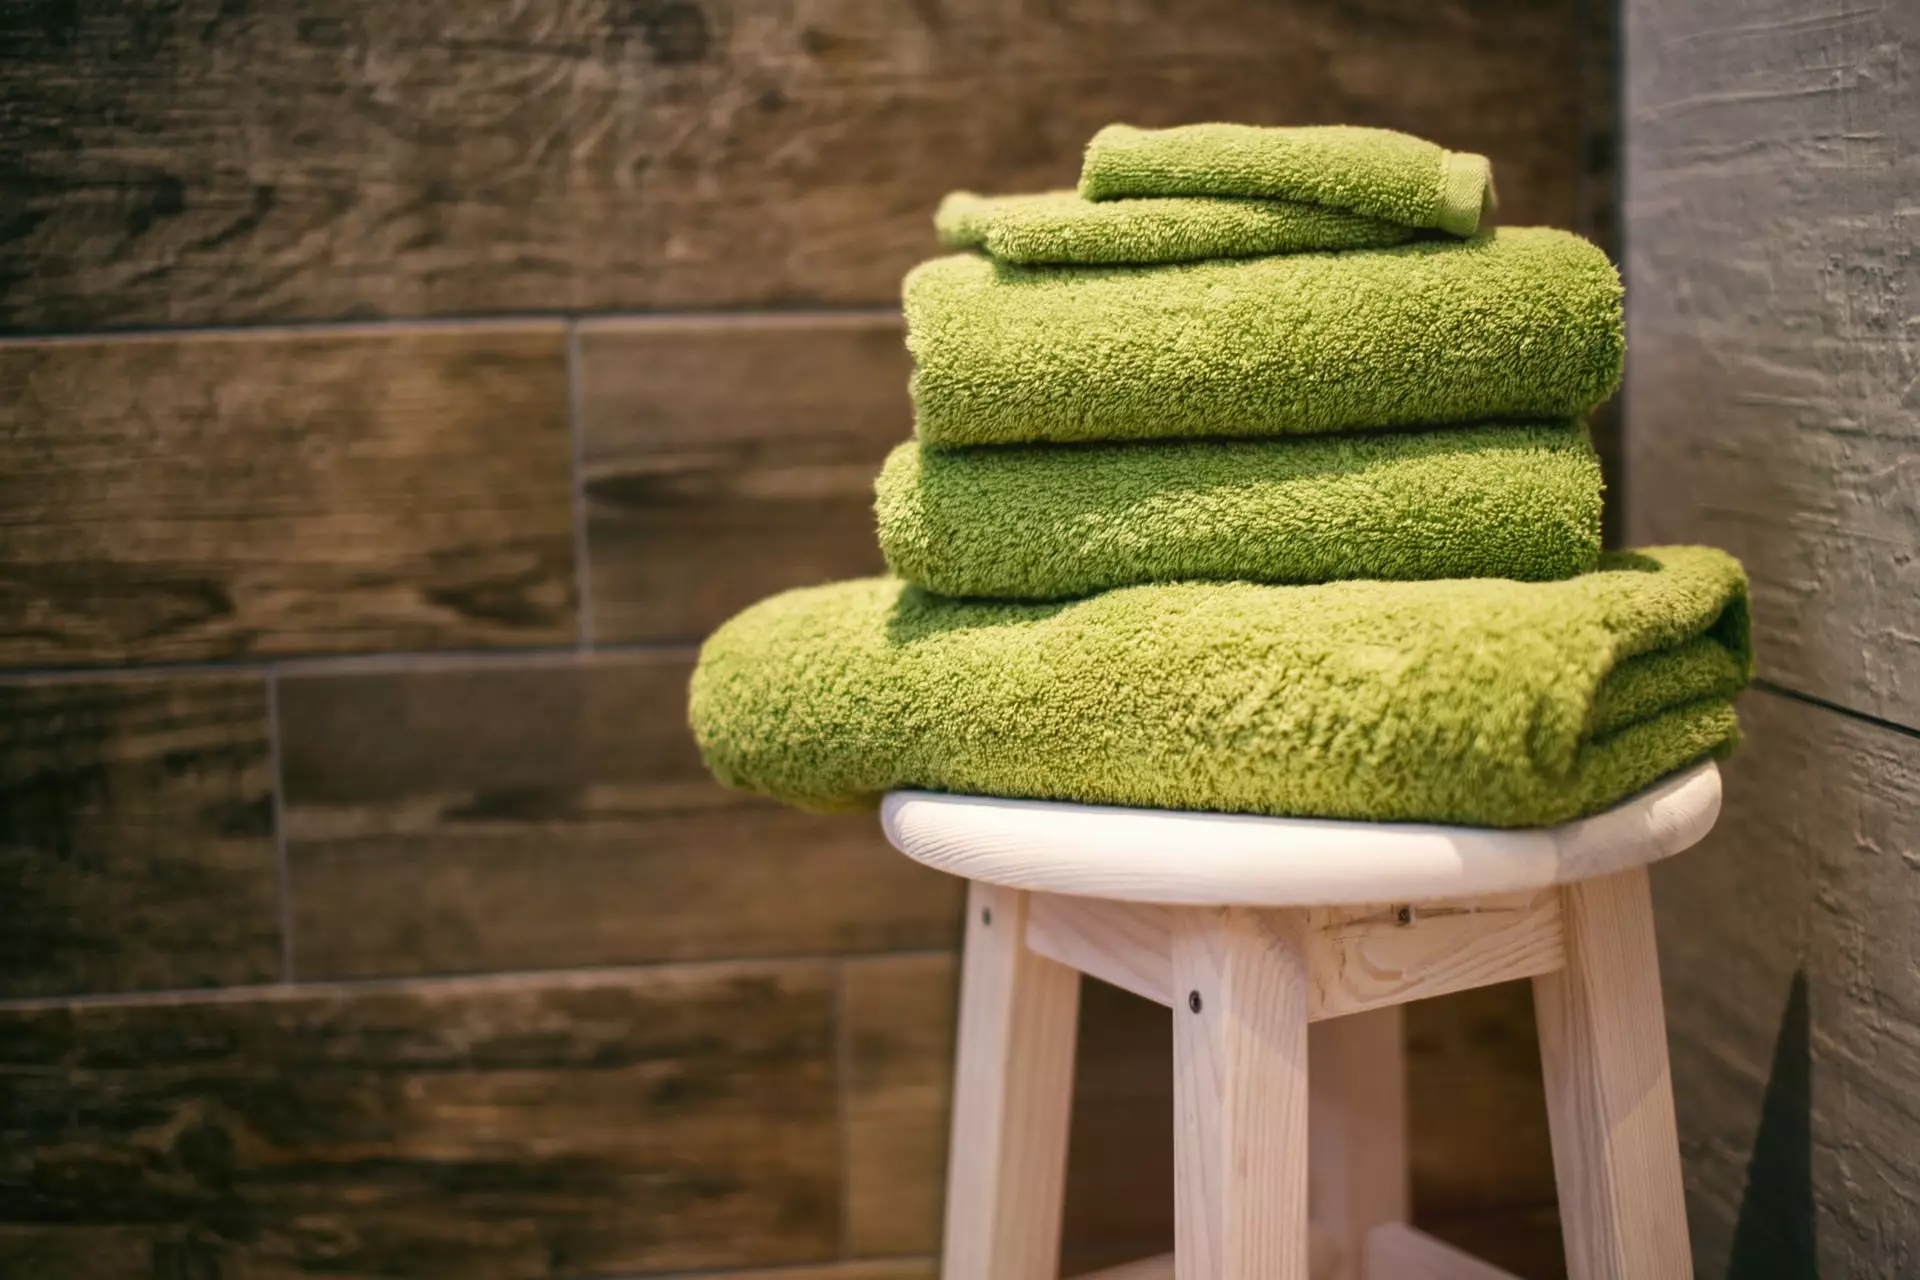 Sharing towels can increase the chance of passing on conjunctivitis and other bacterial infections (